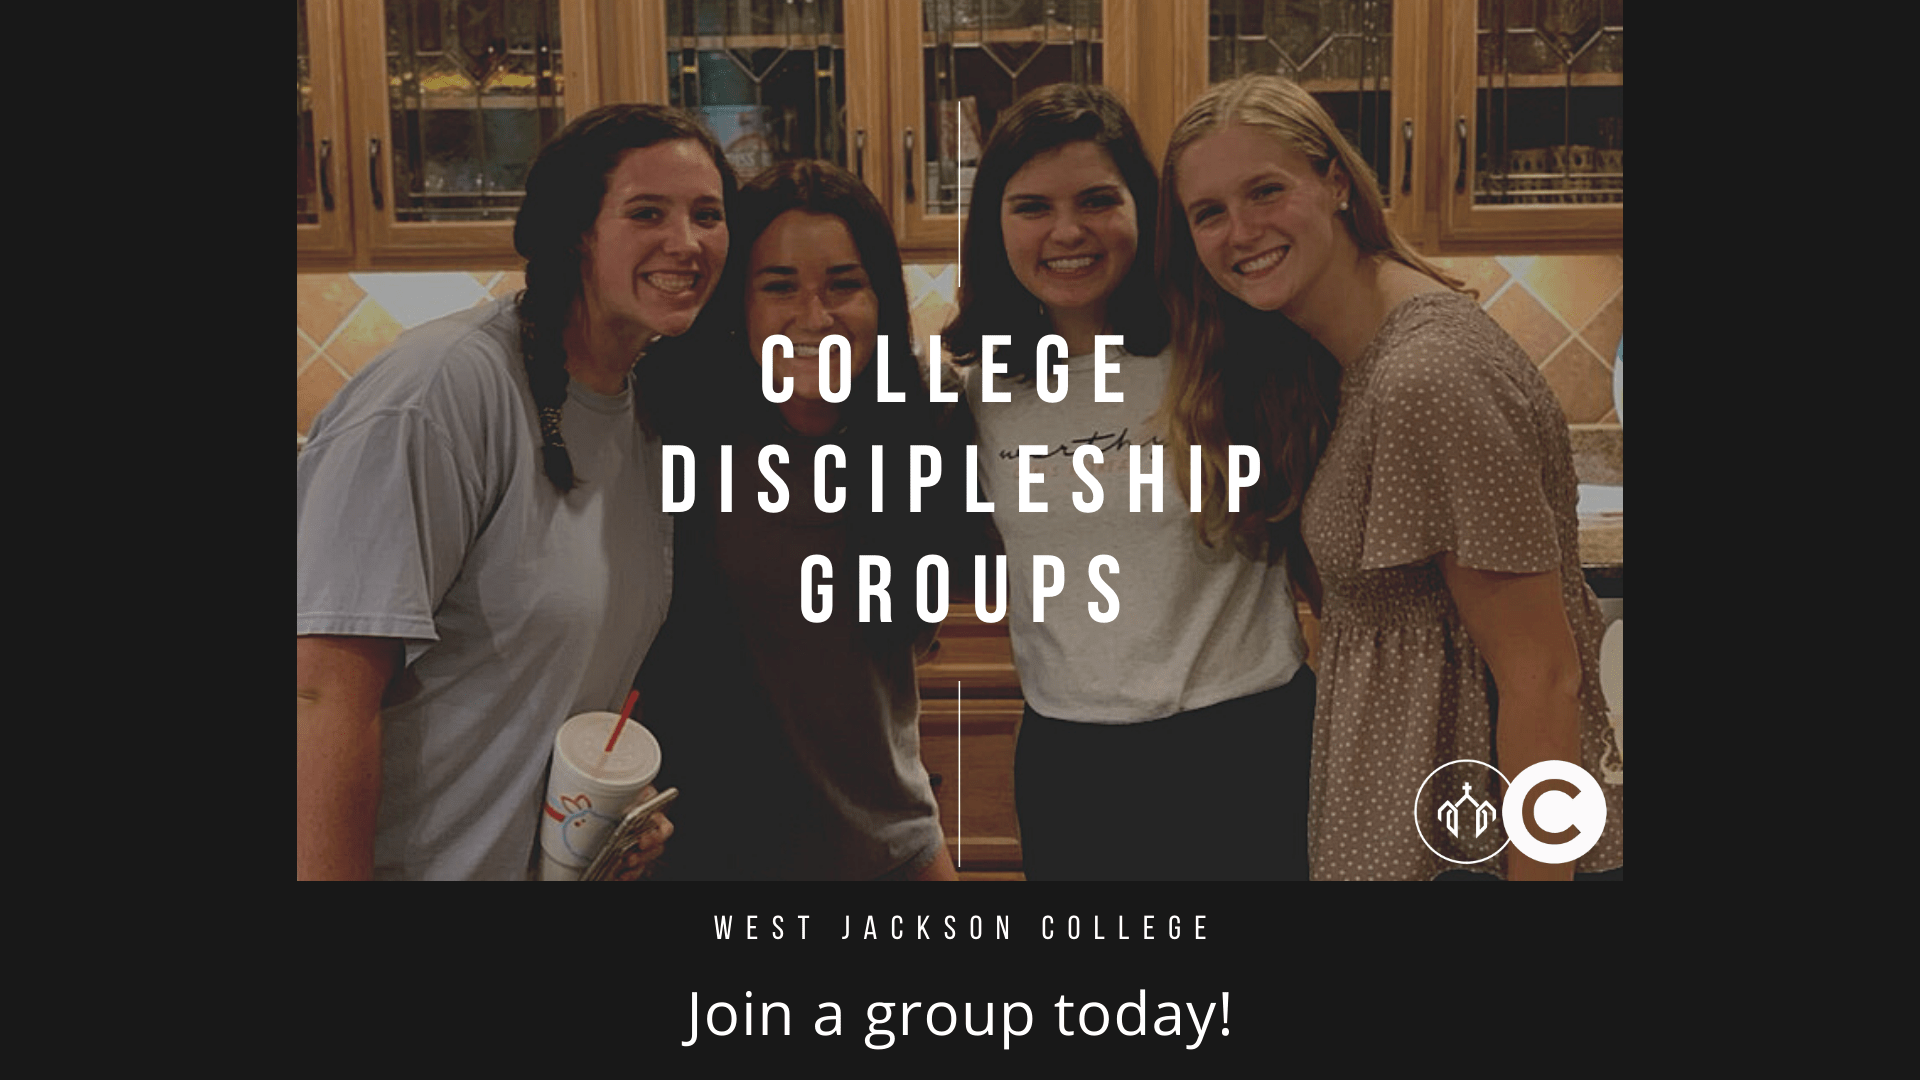 College Discipleship Groups - join a group today!